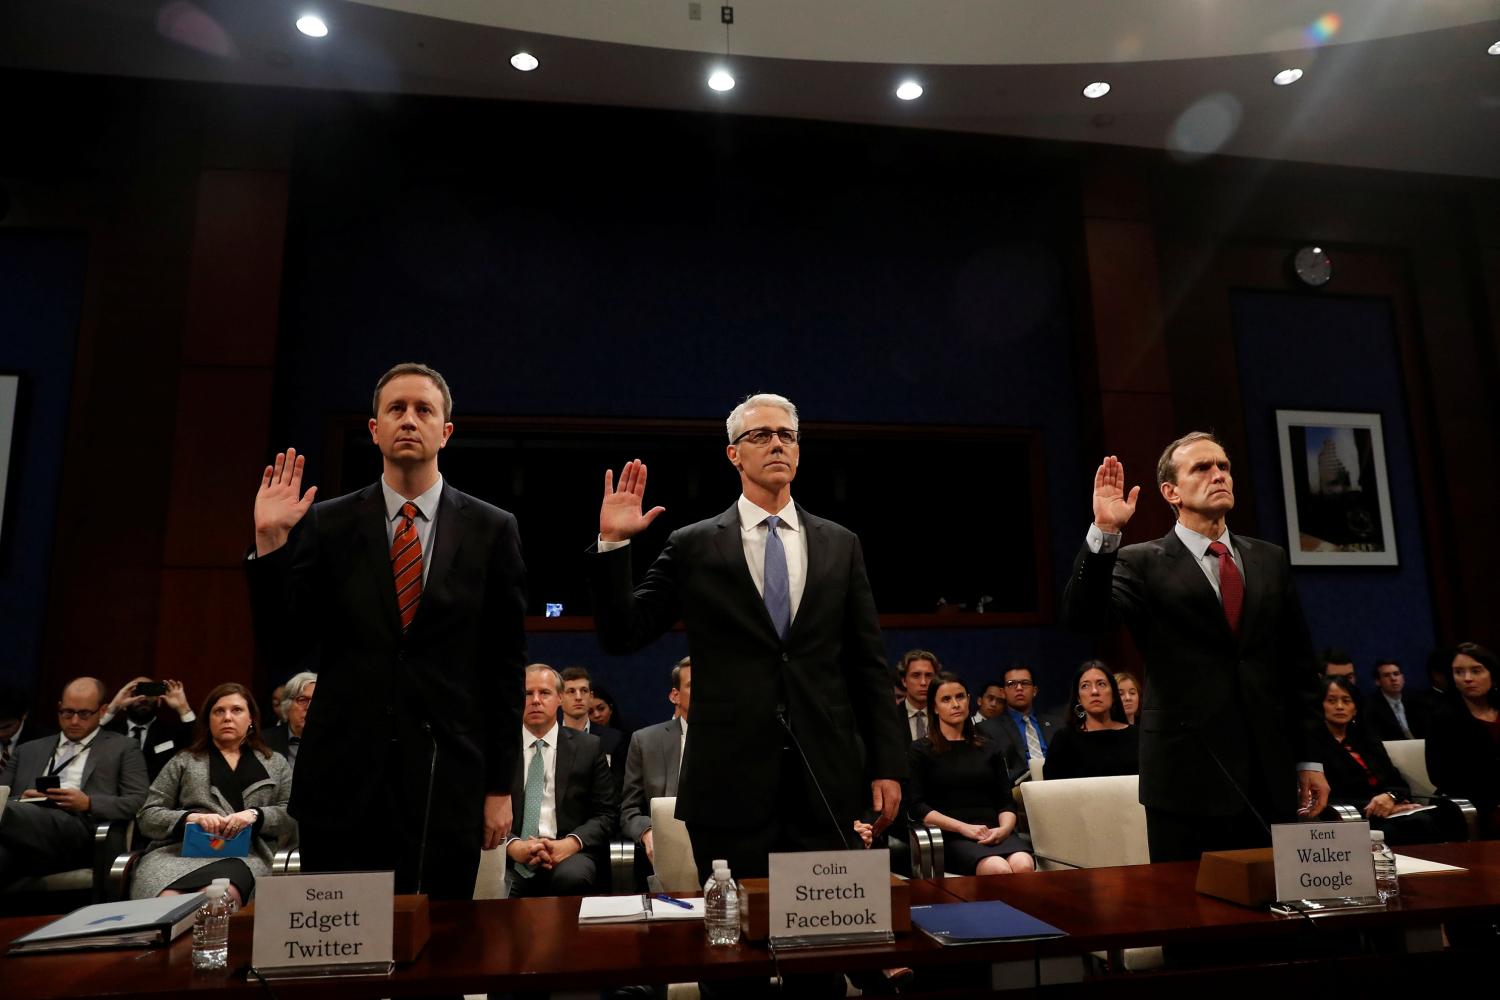 Twitter Acting General Counsel Sean Edgett, Facebook General Counsel Colin Stretch and Google Senior Vice President and General Counsel Kent Walker are sworn in before the House Intelligence Committee to answer questions related to Russian use of social media to influence U.S. elections, on Capitol Hill in Washington, U.S., November 1, 2017. REUTERS/Aaron P. Bernstein - RC16D2B0FBC0